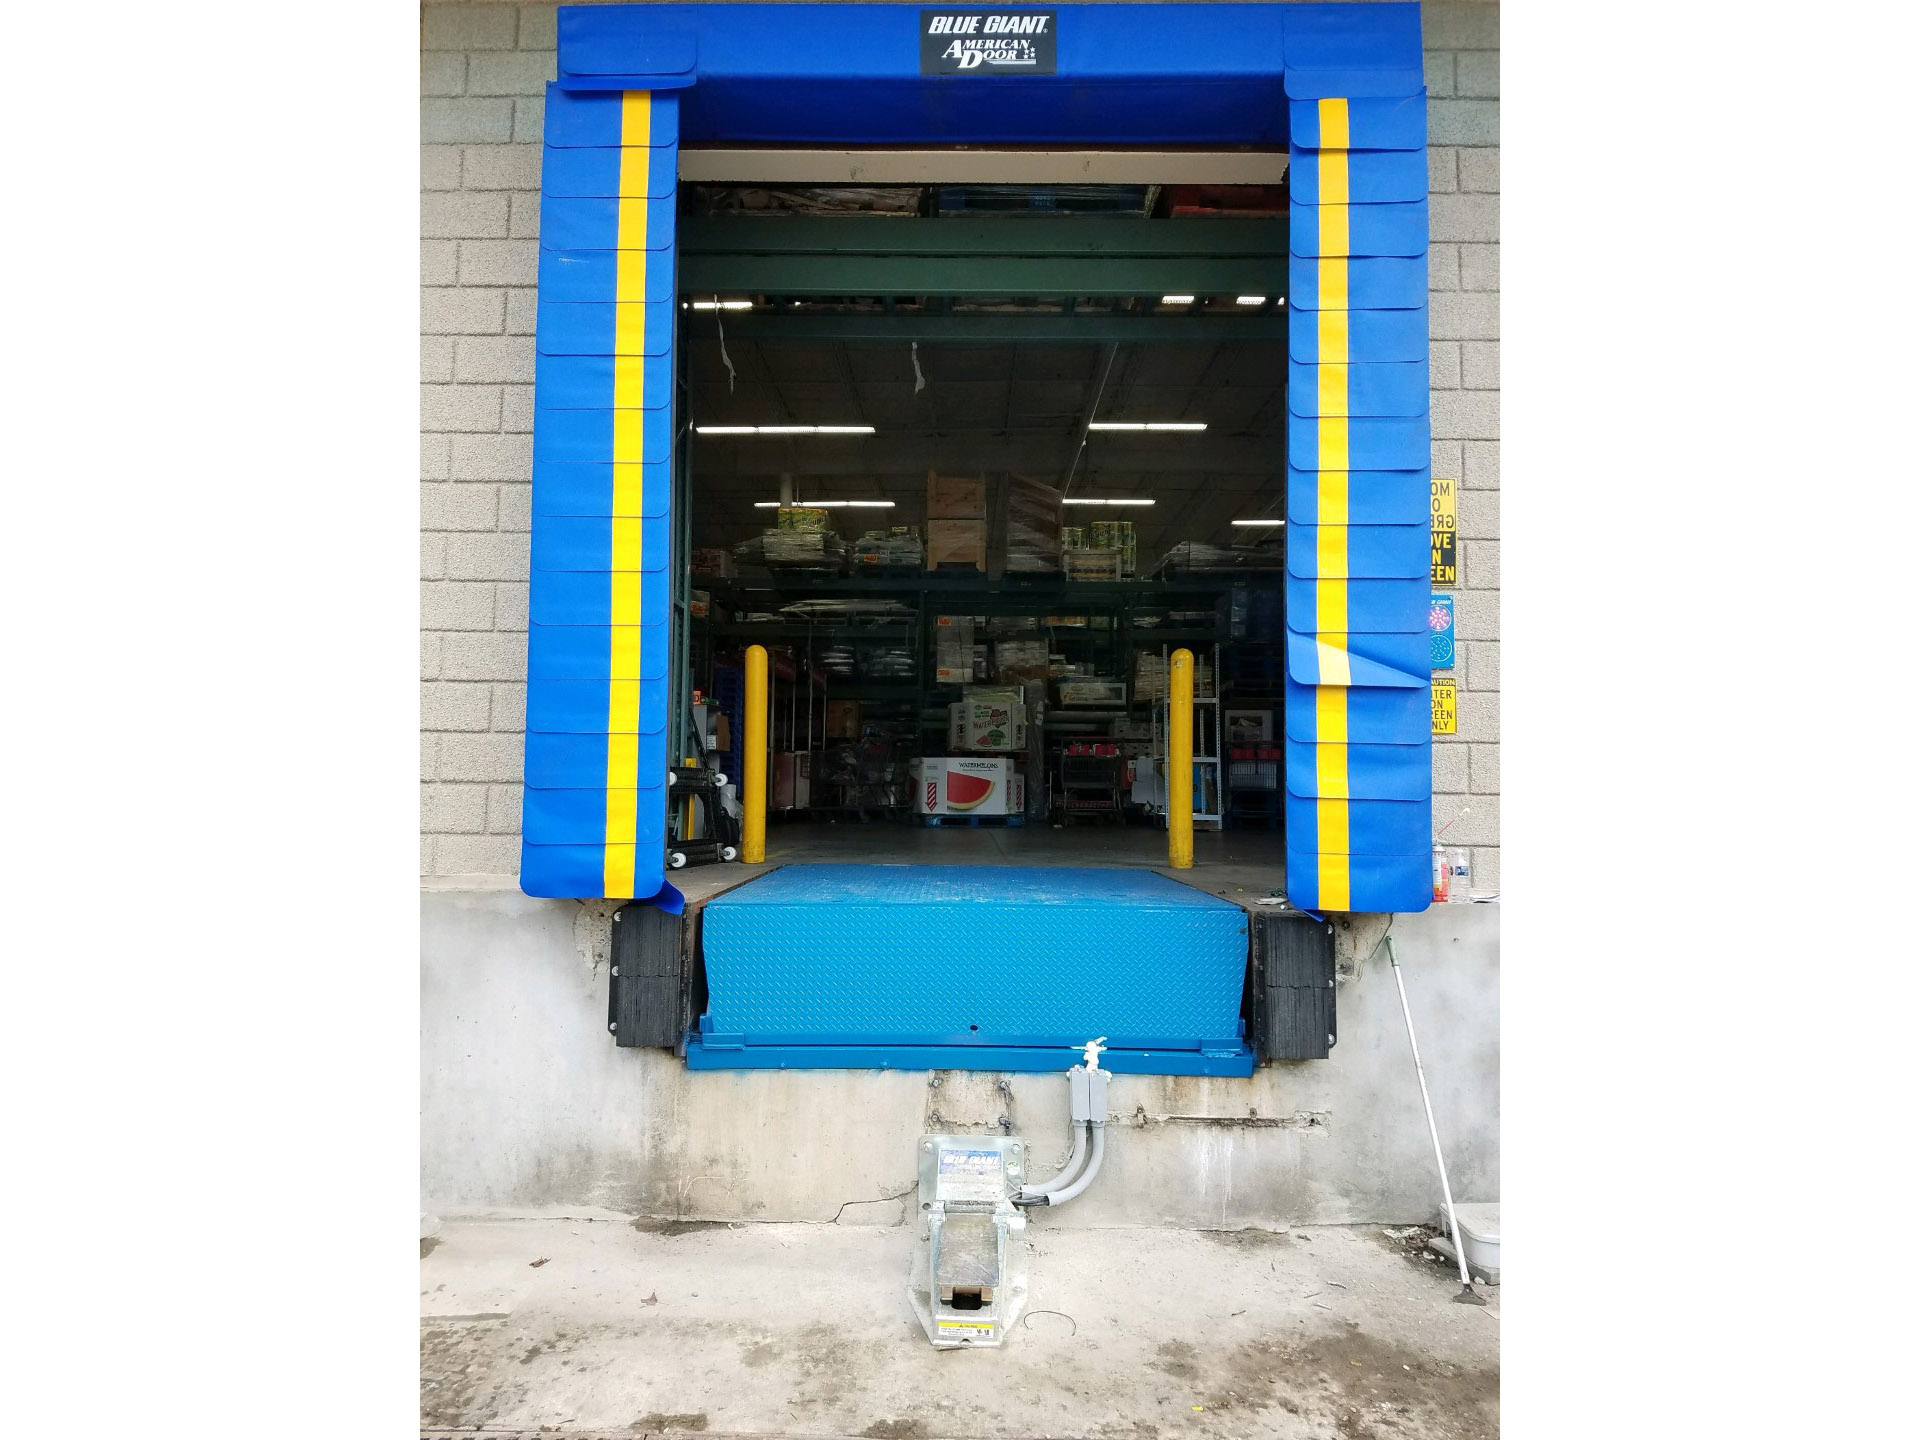 Head Curtain Dock Seal with hydraulic vehicle restraint and hydraulic dock leveler